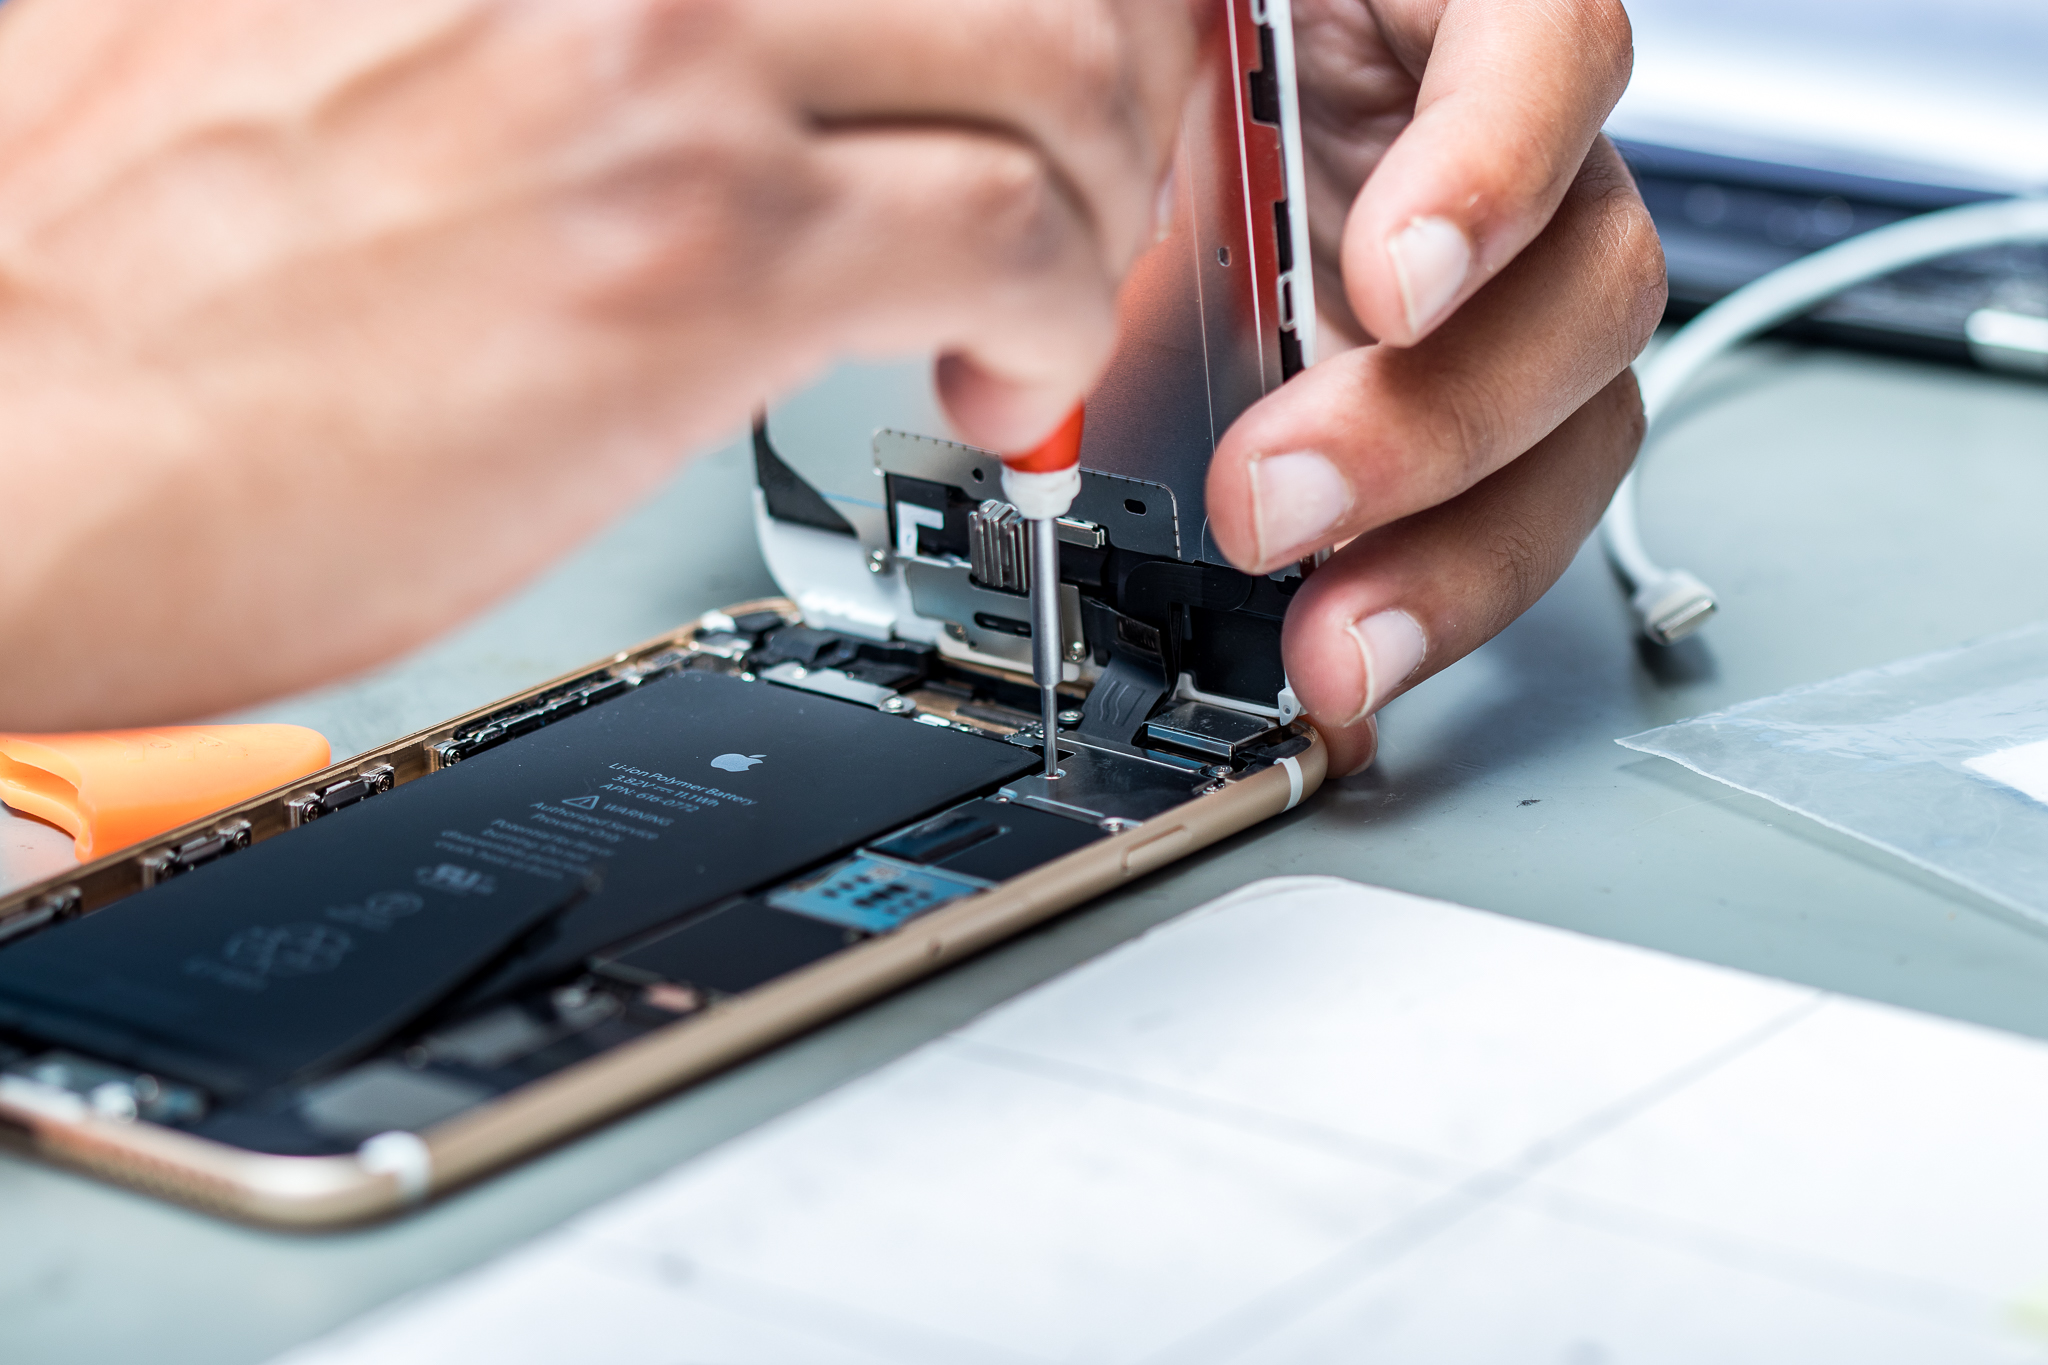 The Ultimate Guide to iPhone Repair: Tips and Tricks You Need to Know